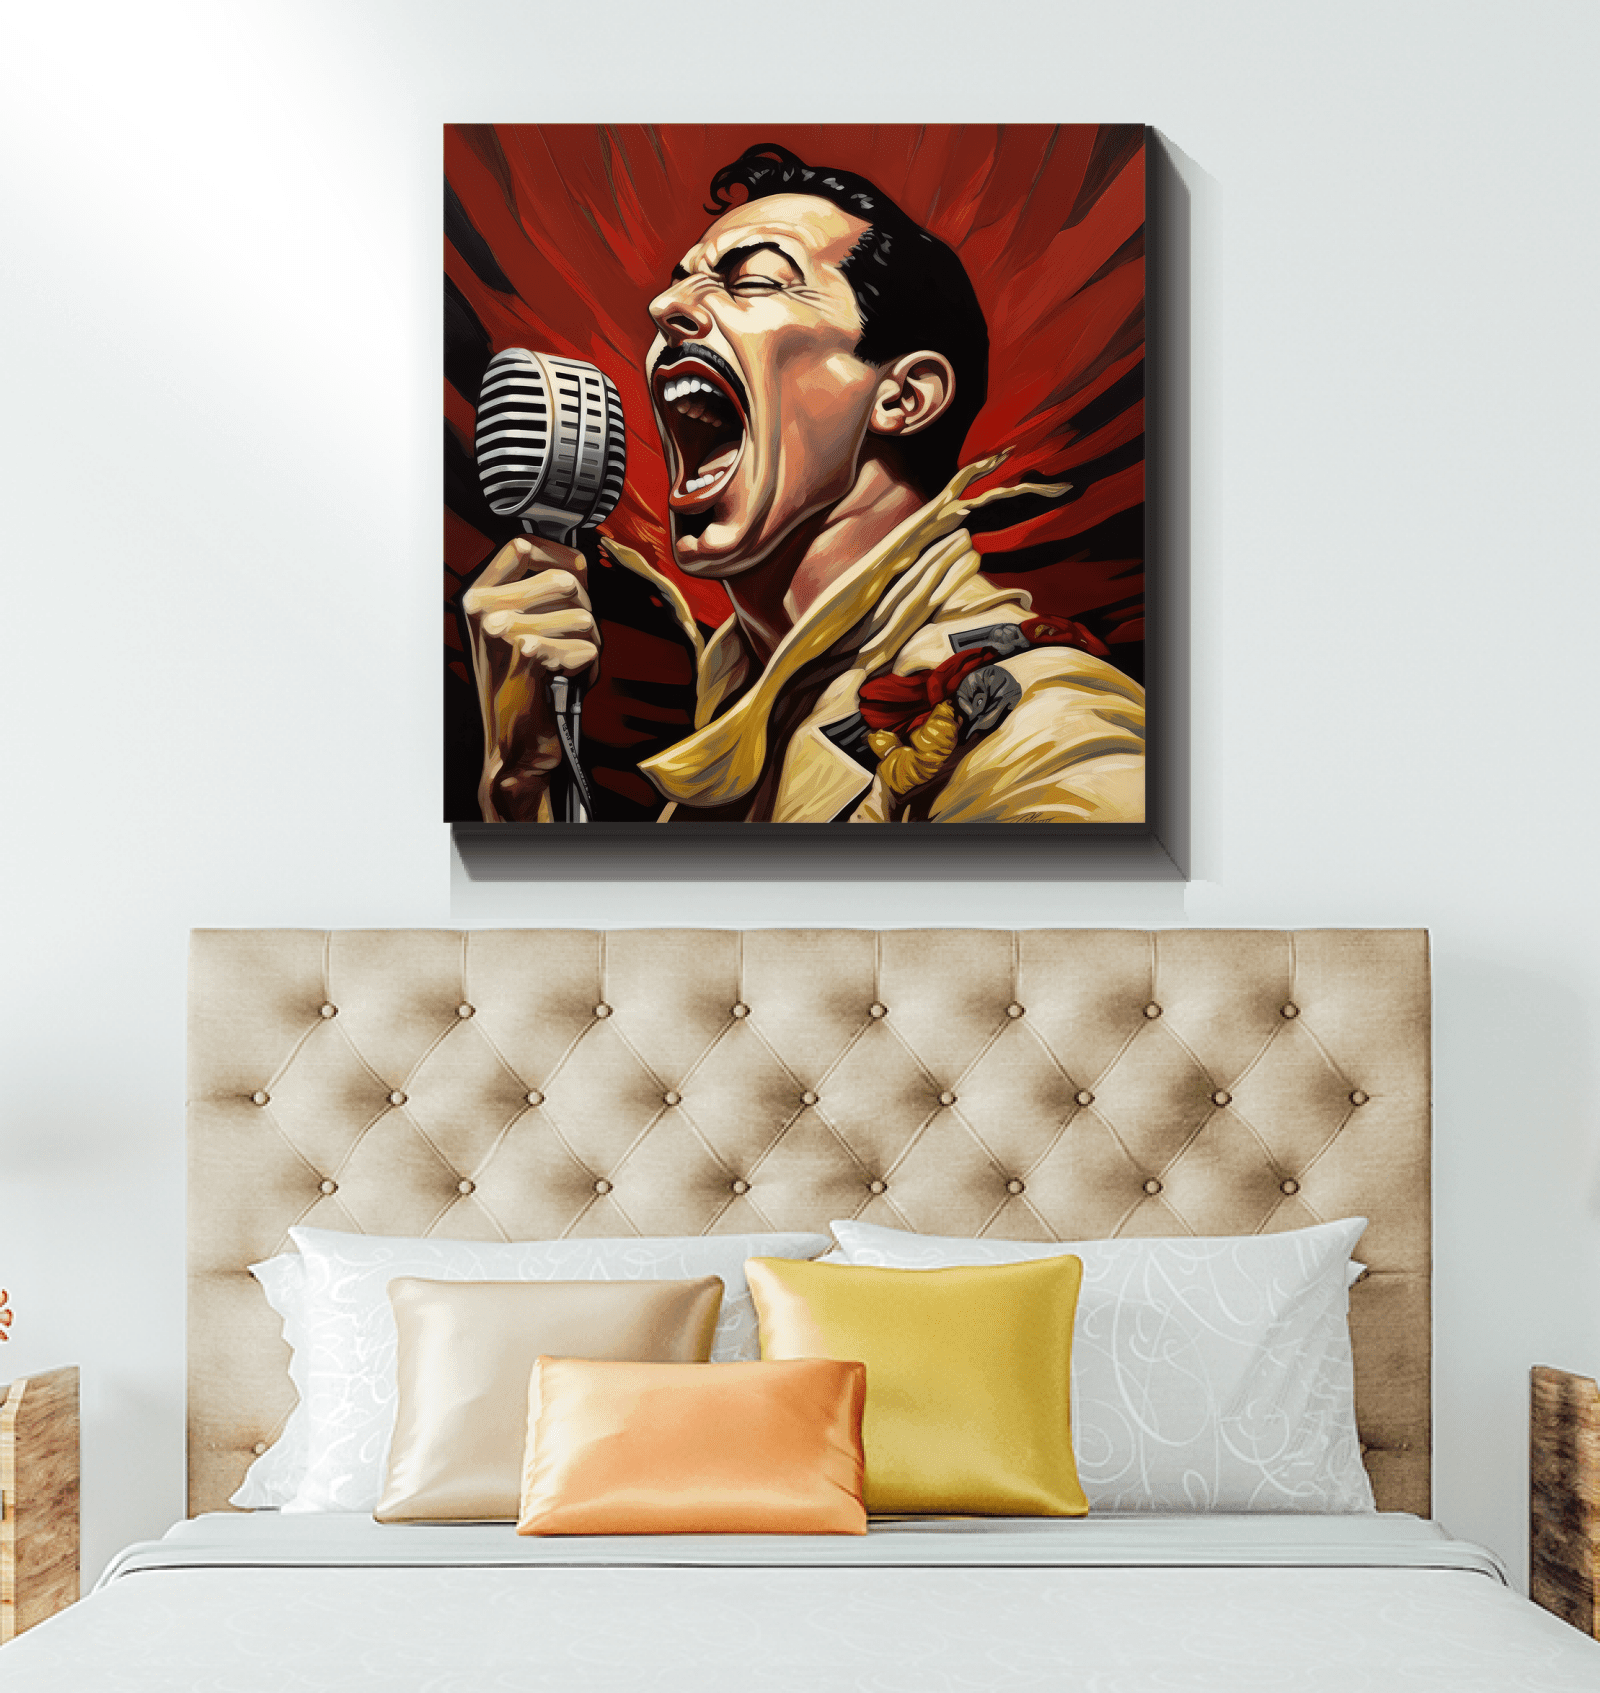 Stylish wrapped canvas portraying musicians as cultural influencers.